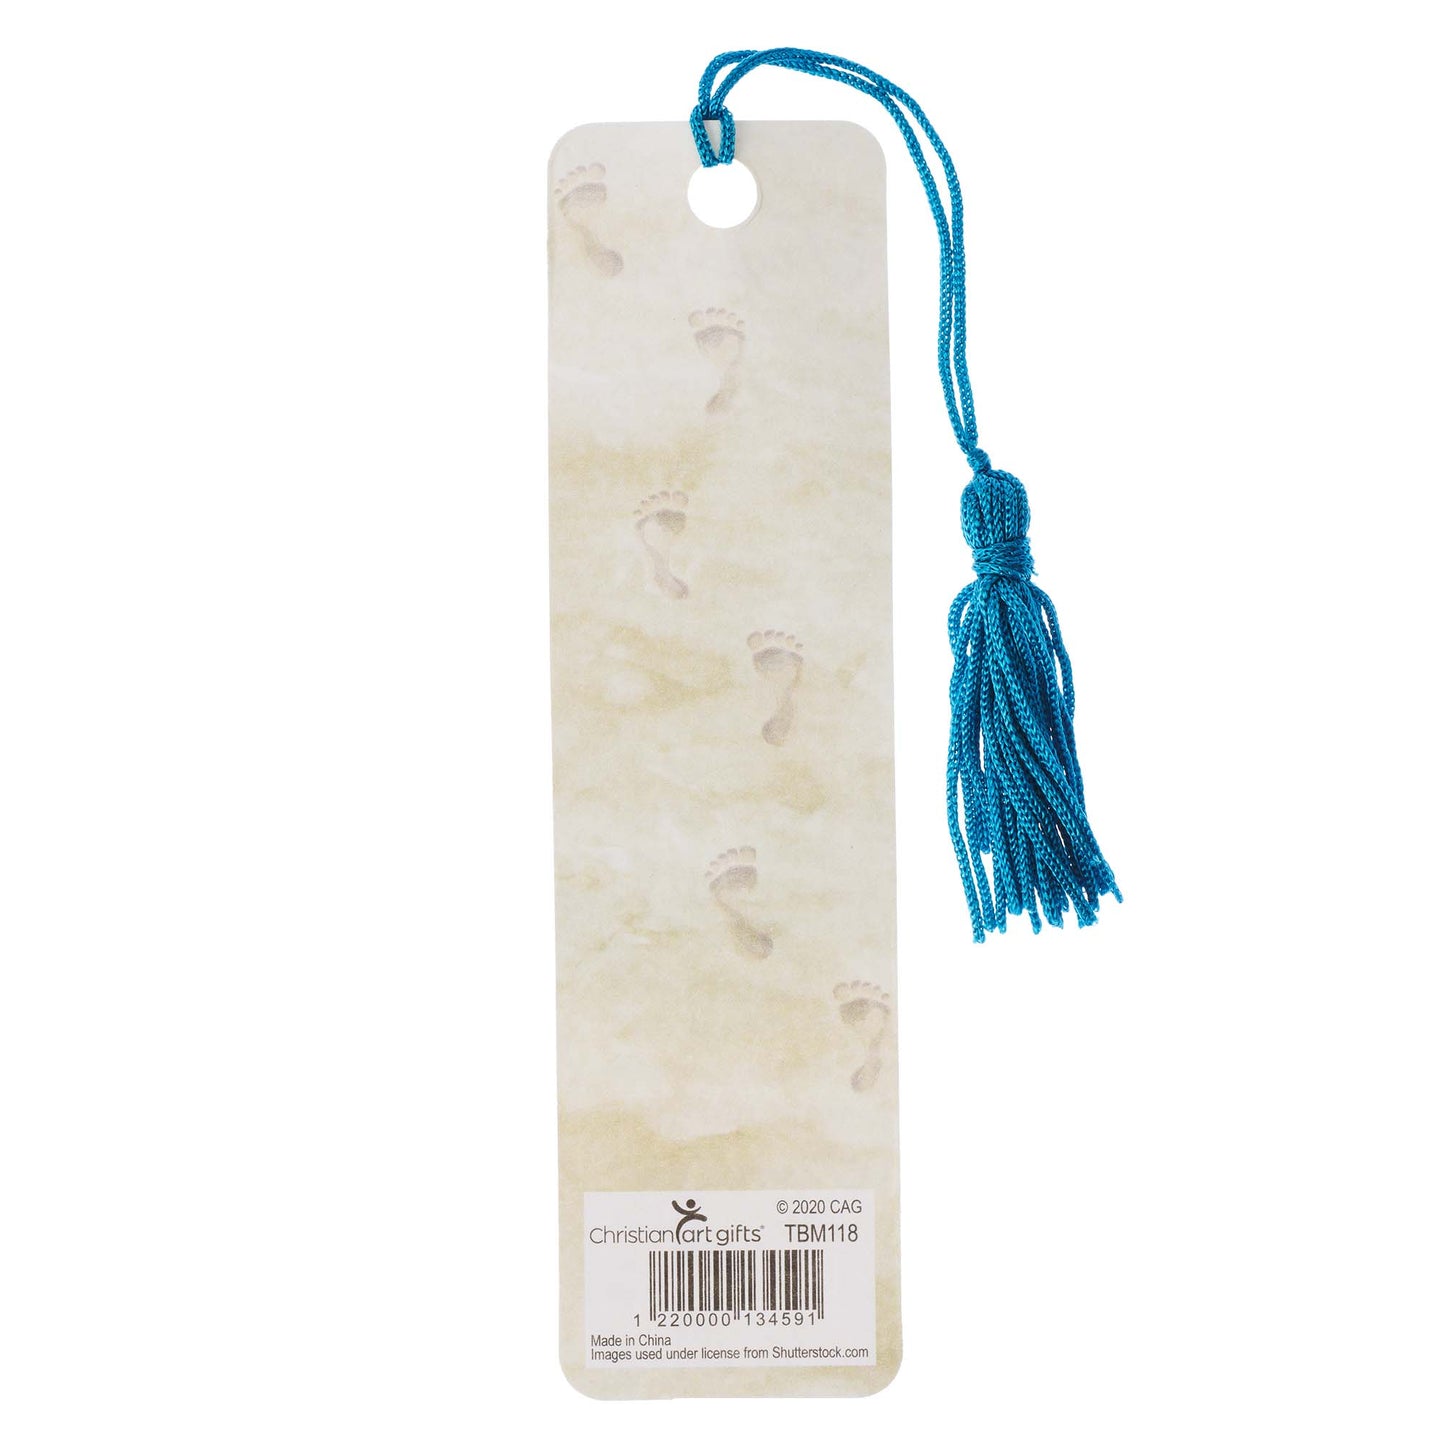 Footprints Bookmark with Tassel - The Christian Gift Company